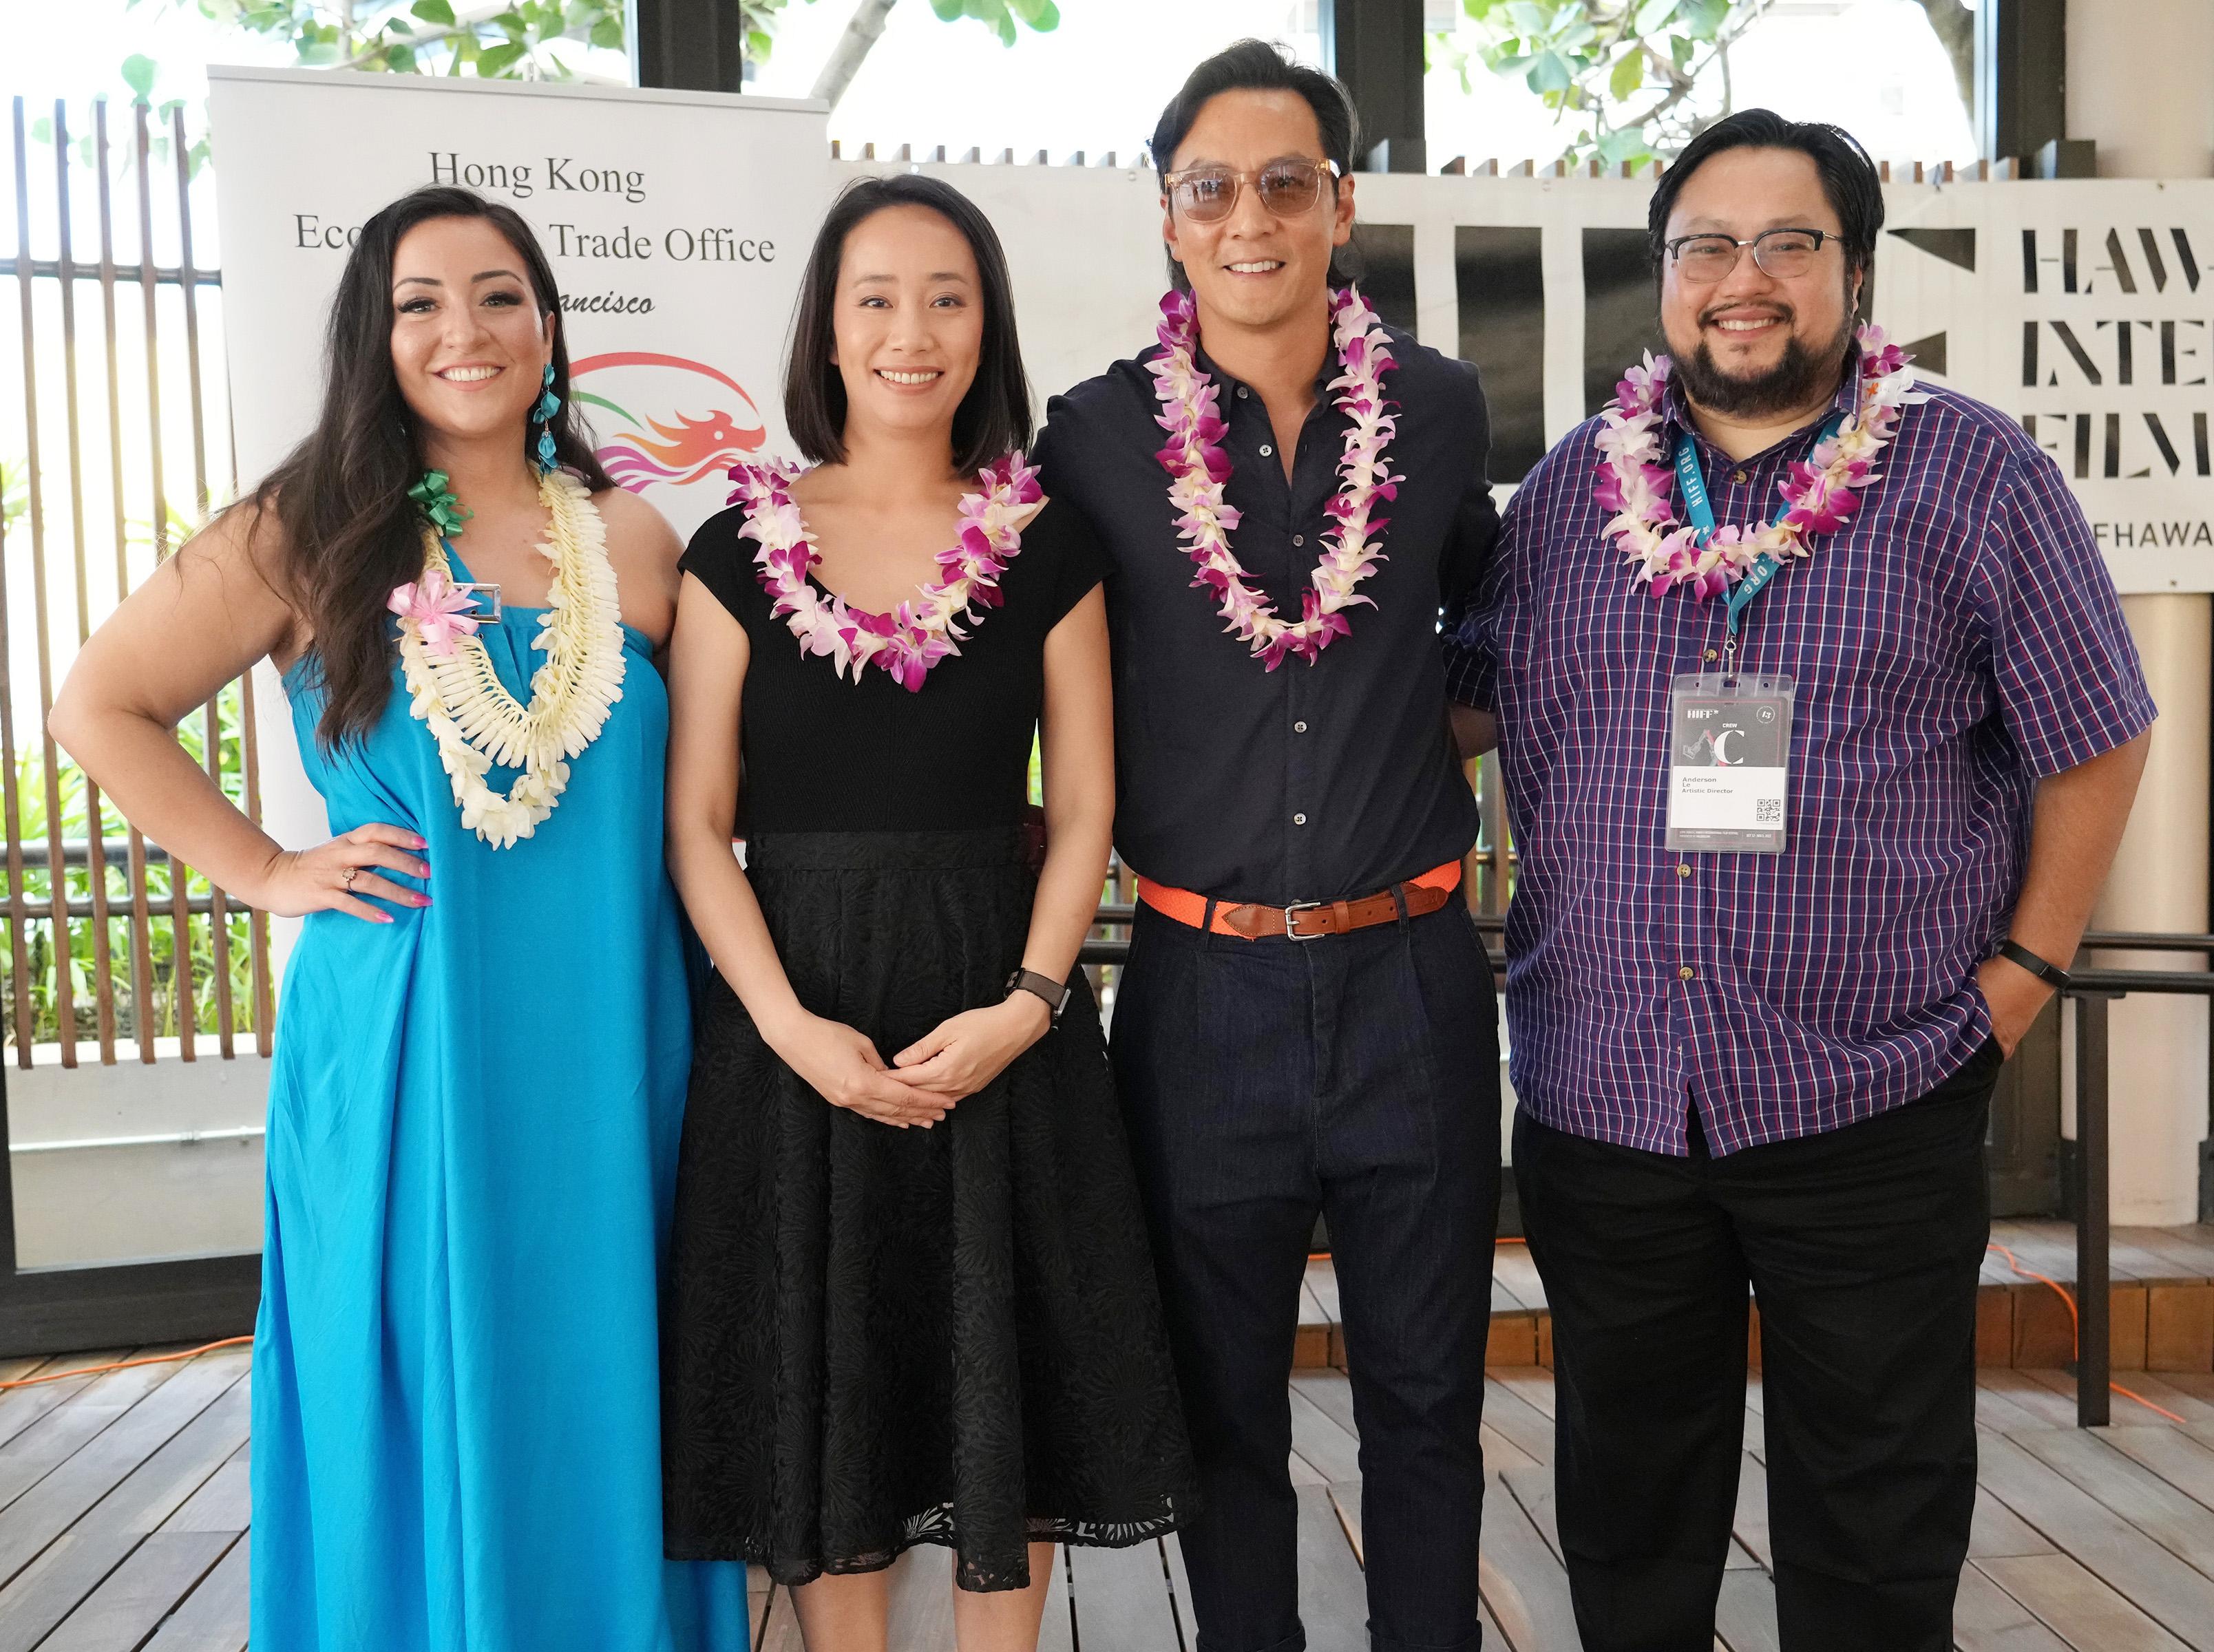 The Hong Kong Economic and Trade Office in San Francisco (HKETO San Francisco) sponsored the 43rd Hawai'i International Film Festival (HIFF), which features "Spotlight on Hong Kong" as part of its special presentation to showcase Hong Kong movies. Photo shows (from left) the Executive Director of HIFF, Ms Beckie Stocchetti; the Director of HKETO San Francisco, Ms Jacko Tsang; honouree of "Spotlight on Hong Kong" Daniel Wu; and the Artistic Director of HIFF, Mr Anderson Le, at the Spotlight on Hong Kong Reception on October 17 (Honolulu time).